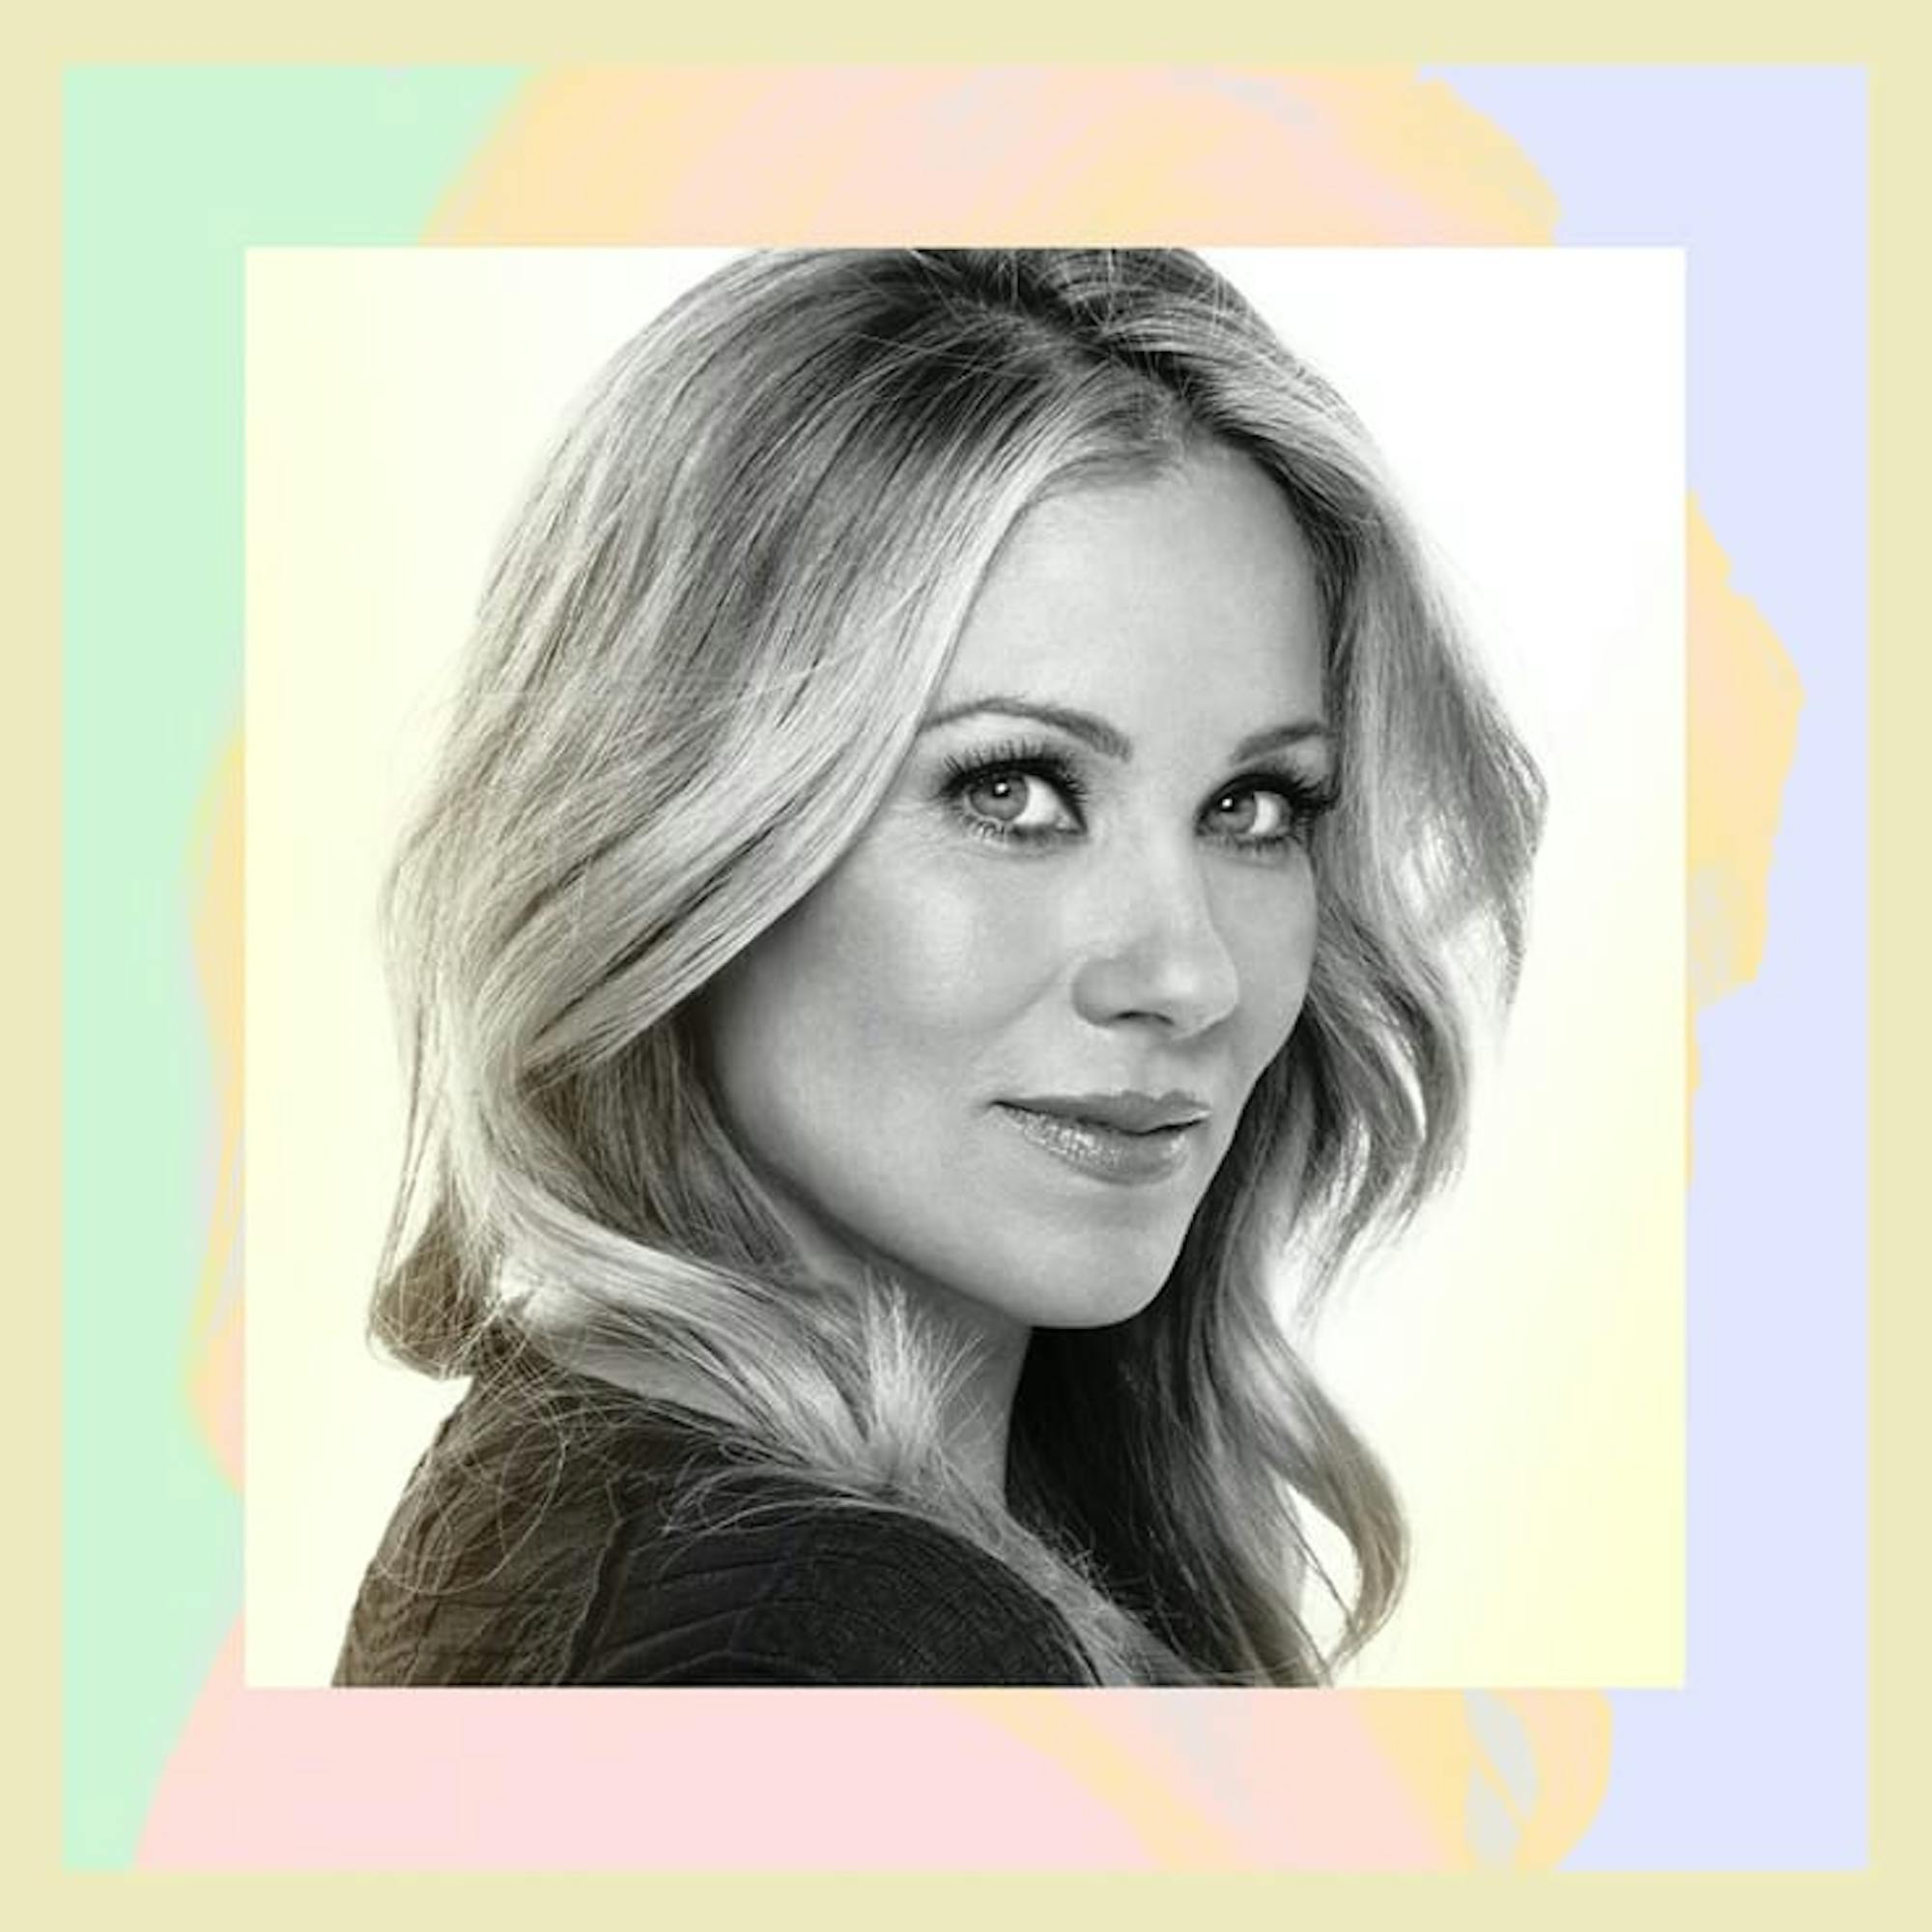 Christina Applegate: Lead actress in a comedy series, Dead to Me